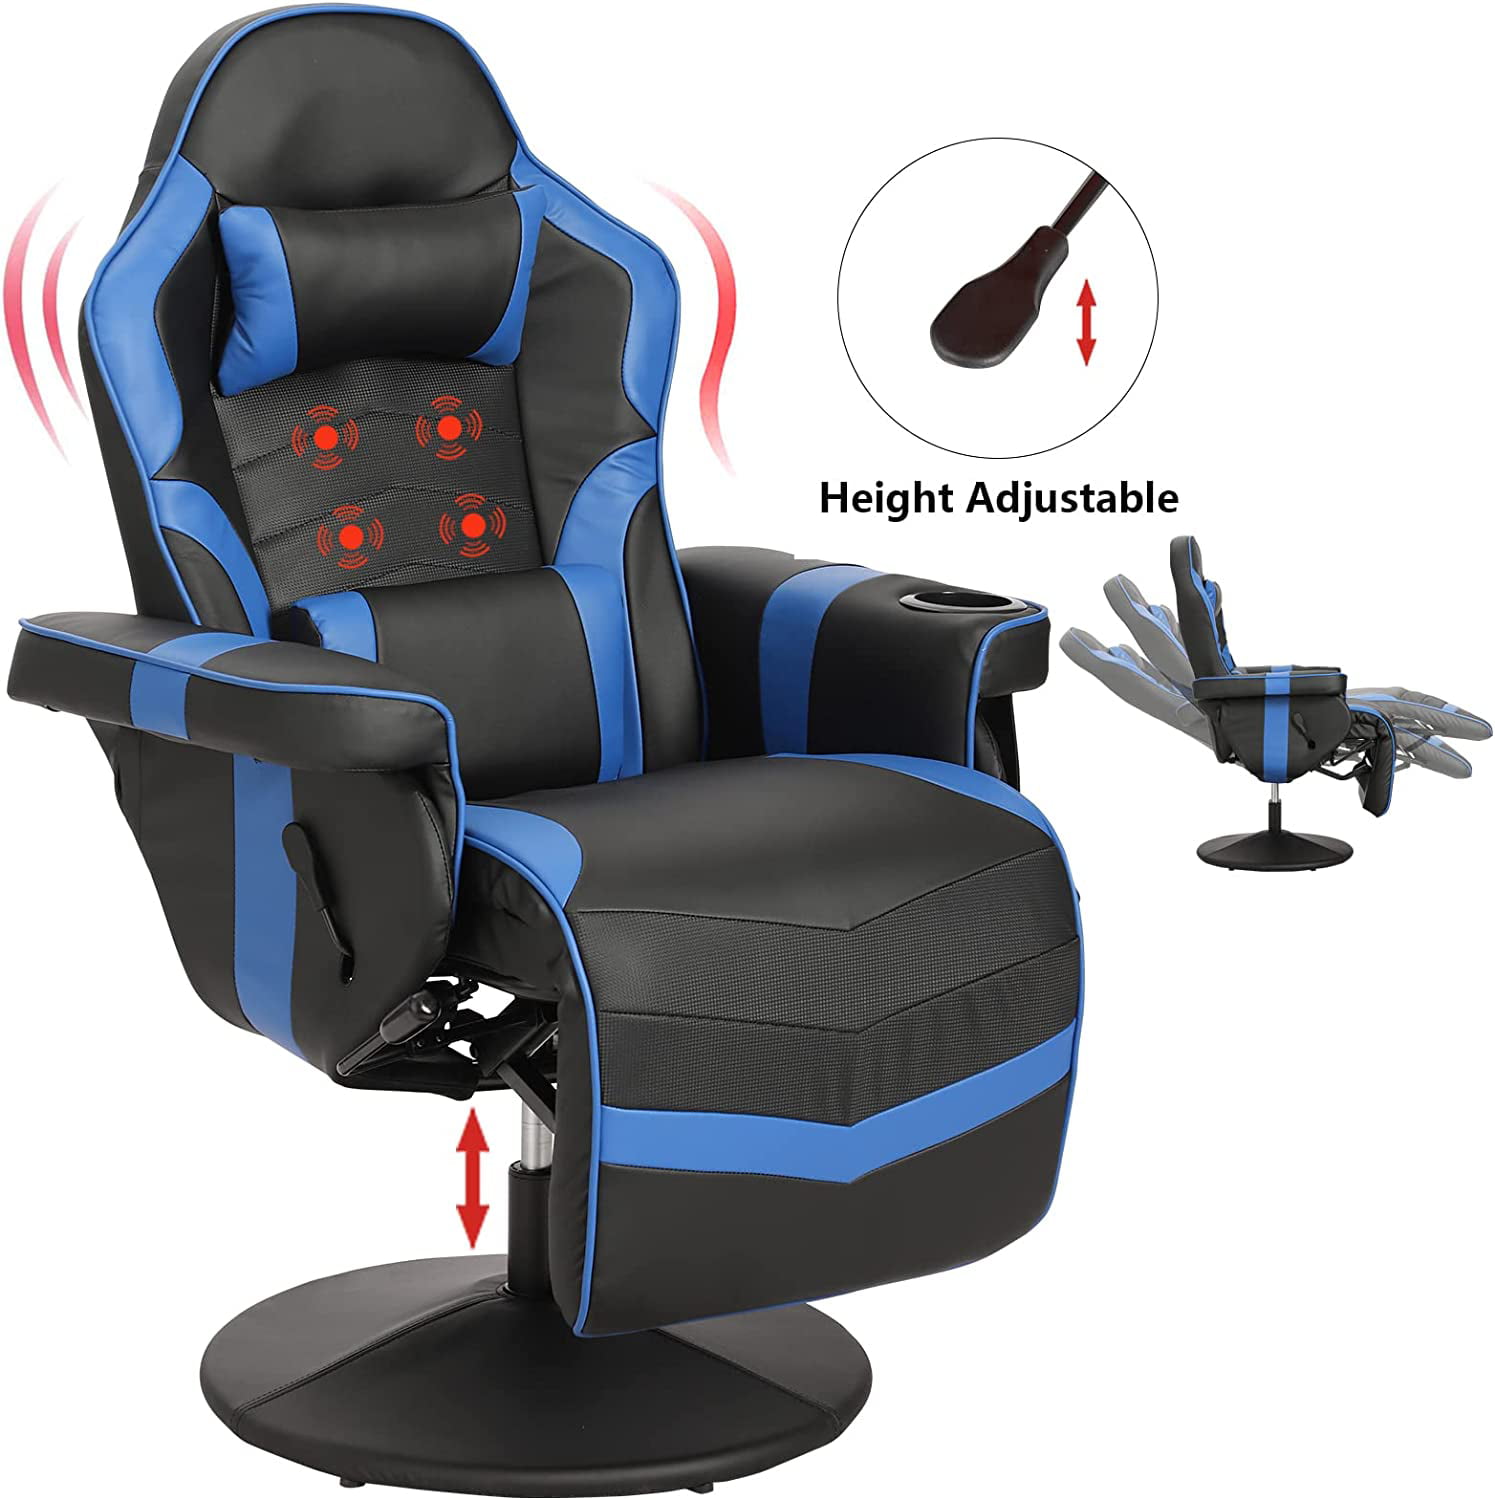 Buddy - this gaming chair for computer game lovers is a real hit